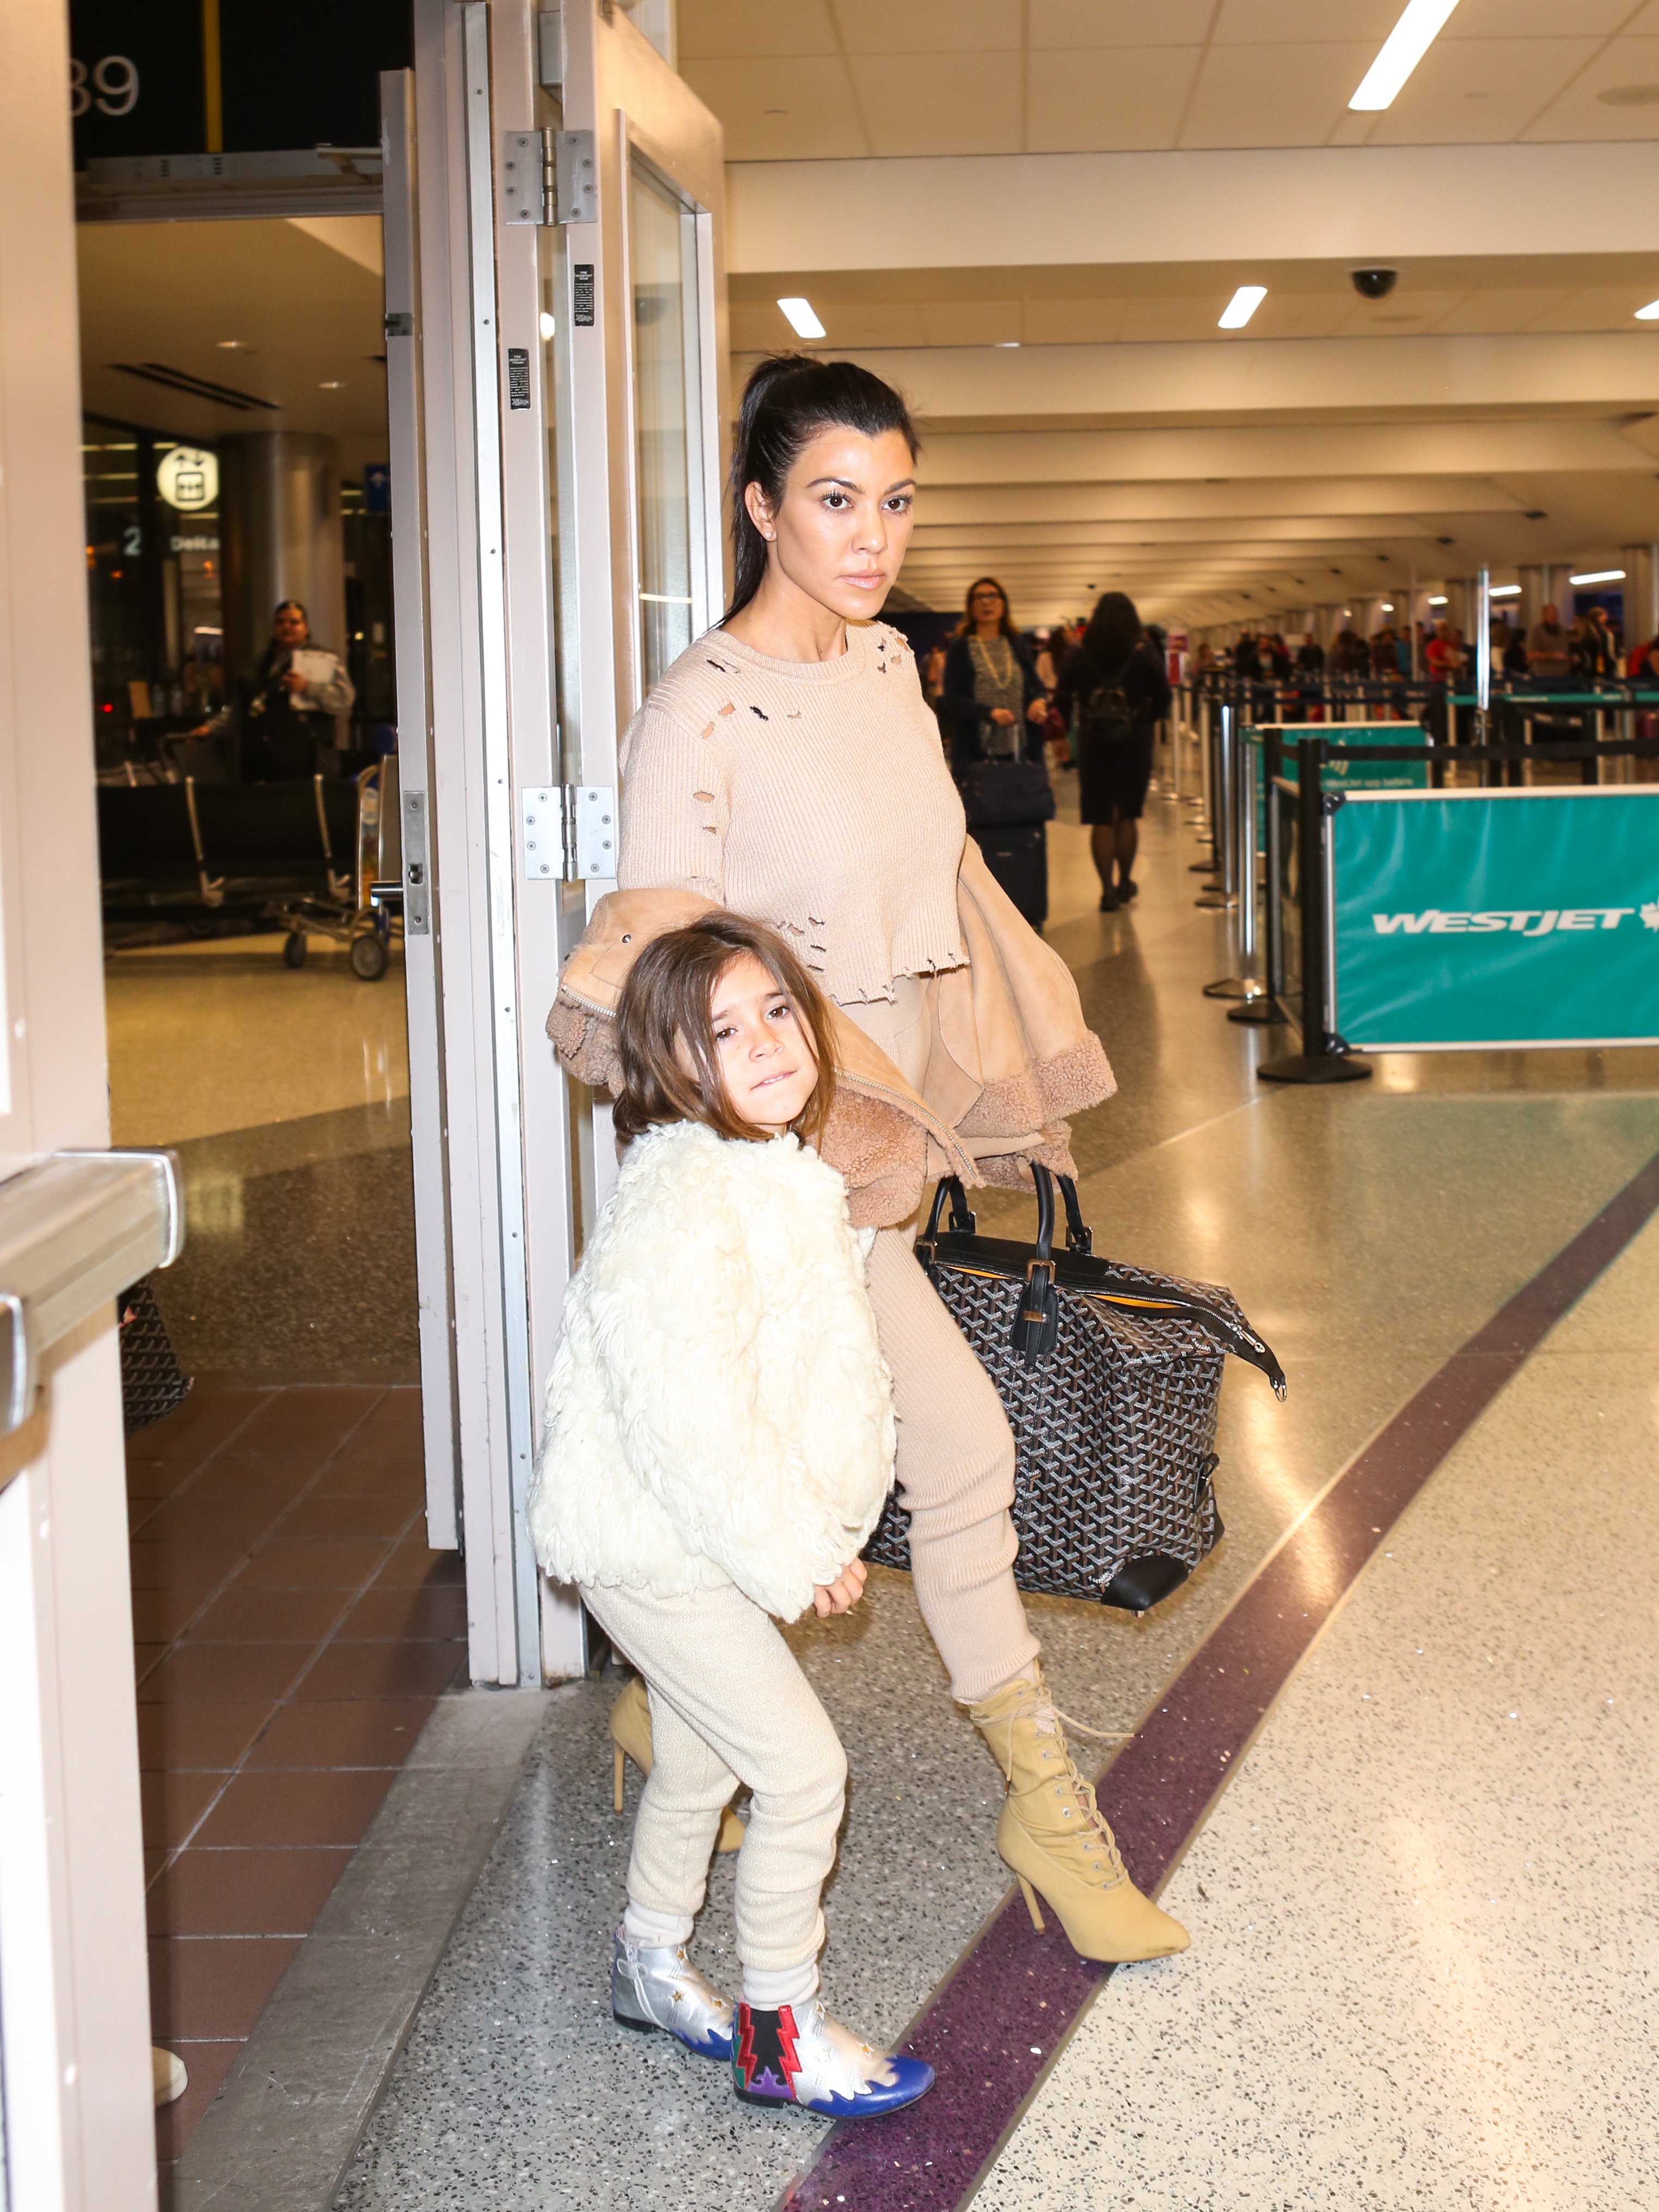 Kourtney Kardashian and her daughter Penelope are seen in Los Angeles International Airport on February 04, 2018 in Los Angeles, California. | Source: Getty Images